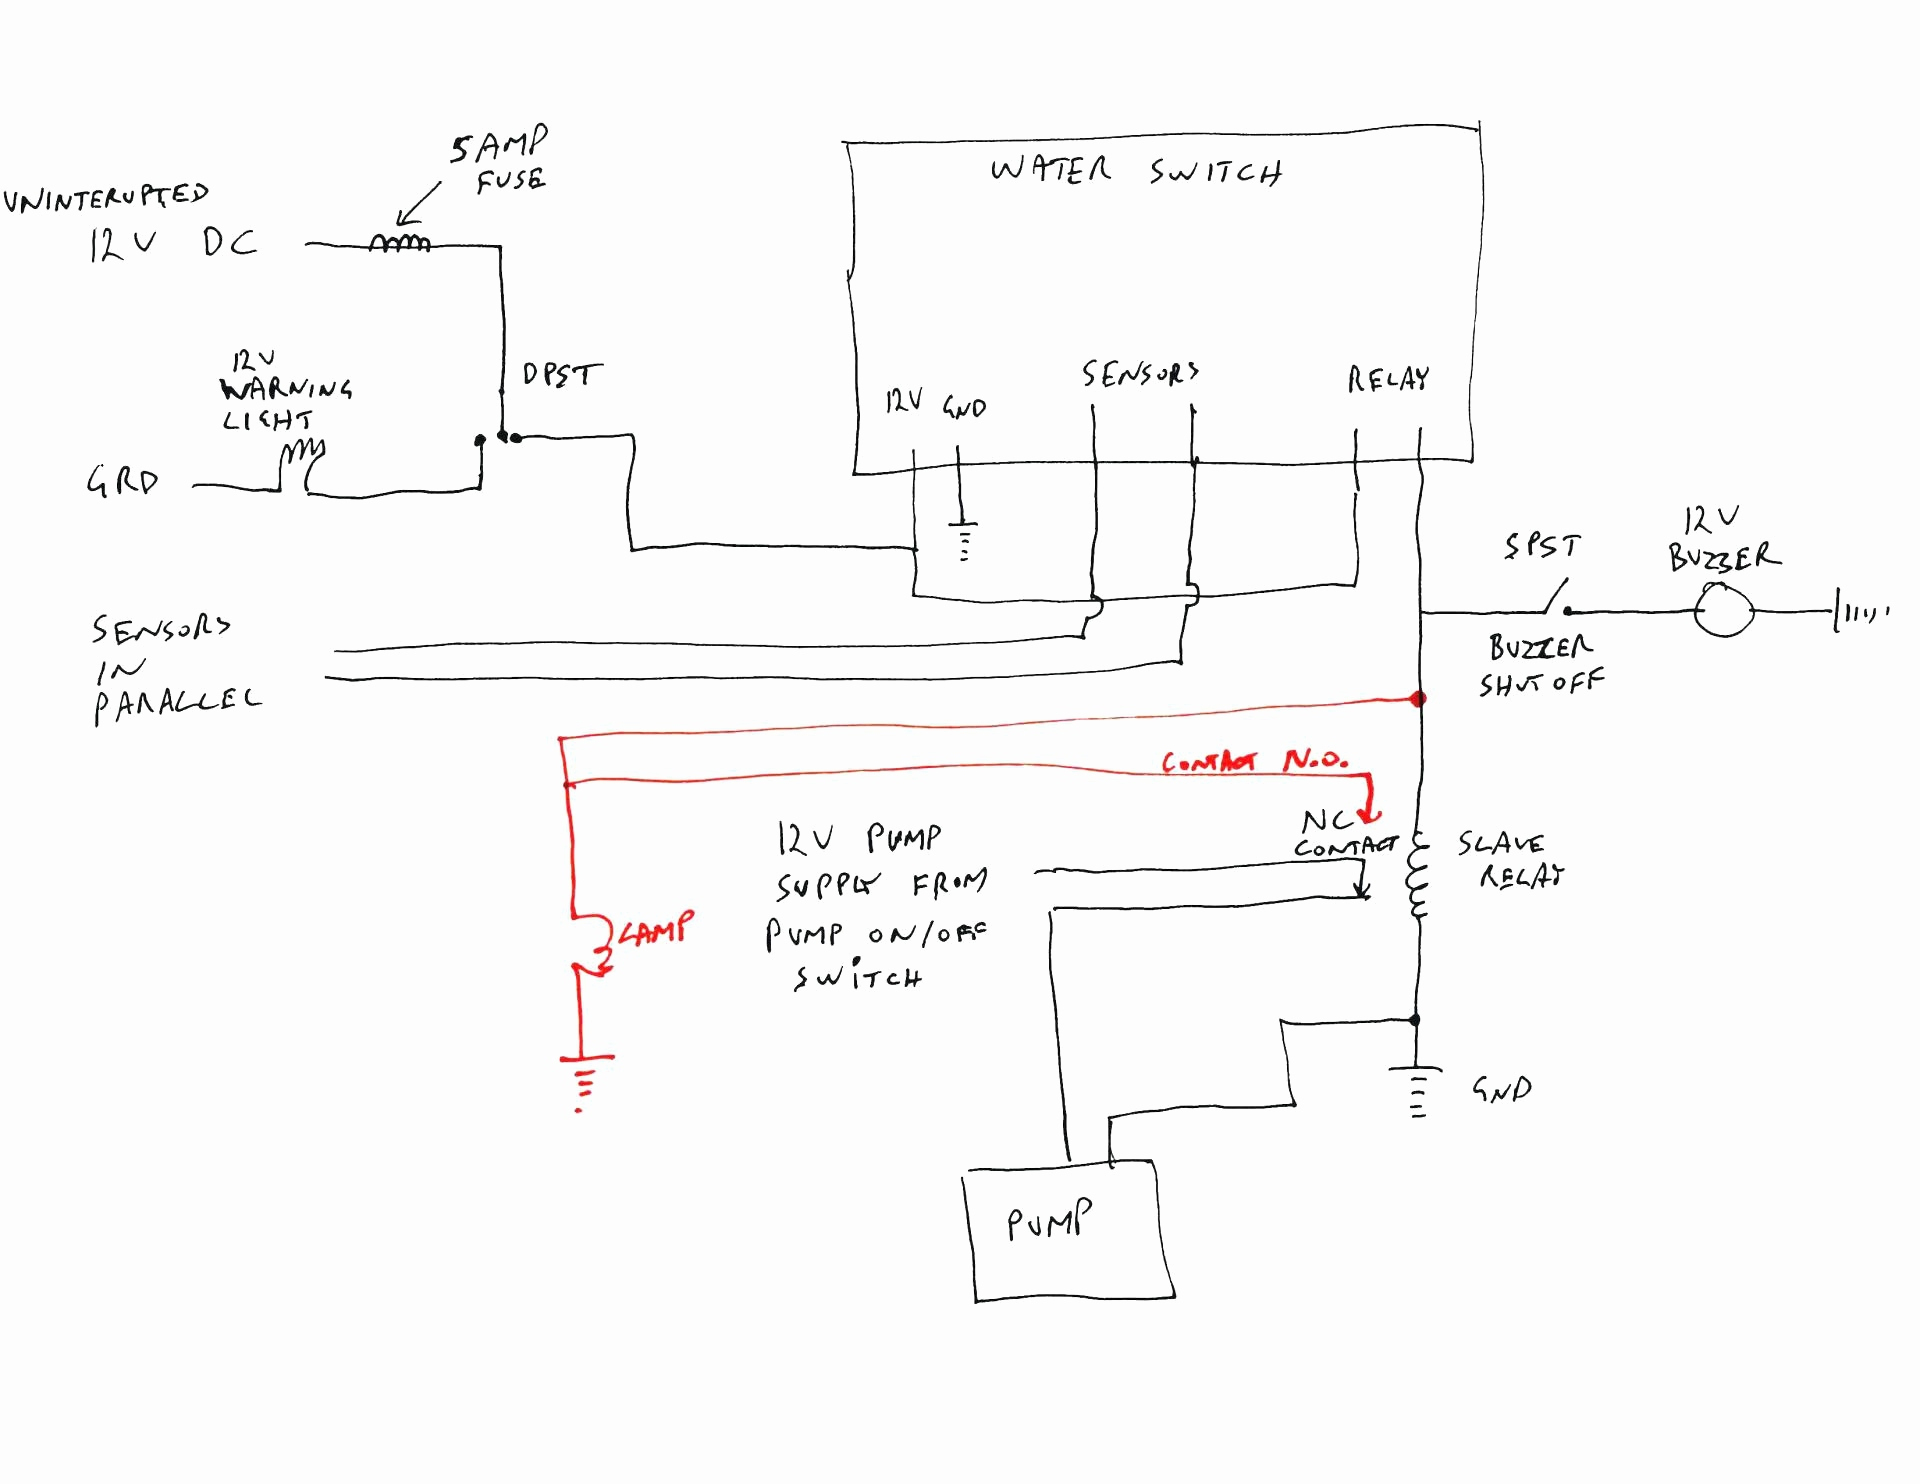 Electric Furnace Sequencer Wiring Schematic | Wiring Diagram - Electric Furnace Sequencer Wiring Diagram